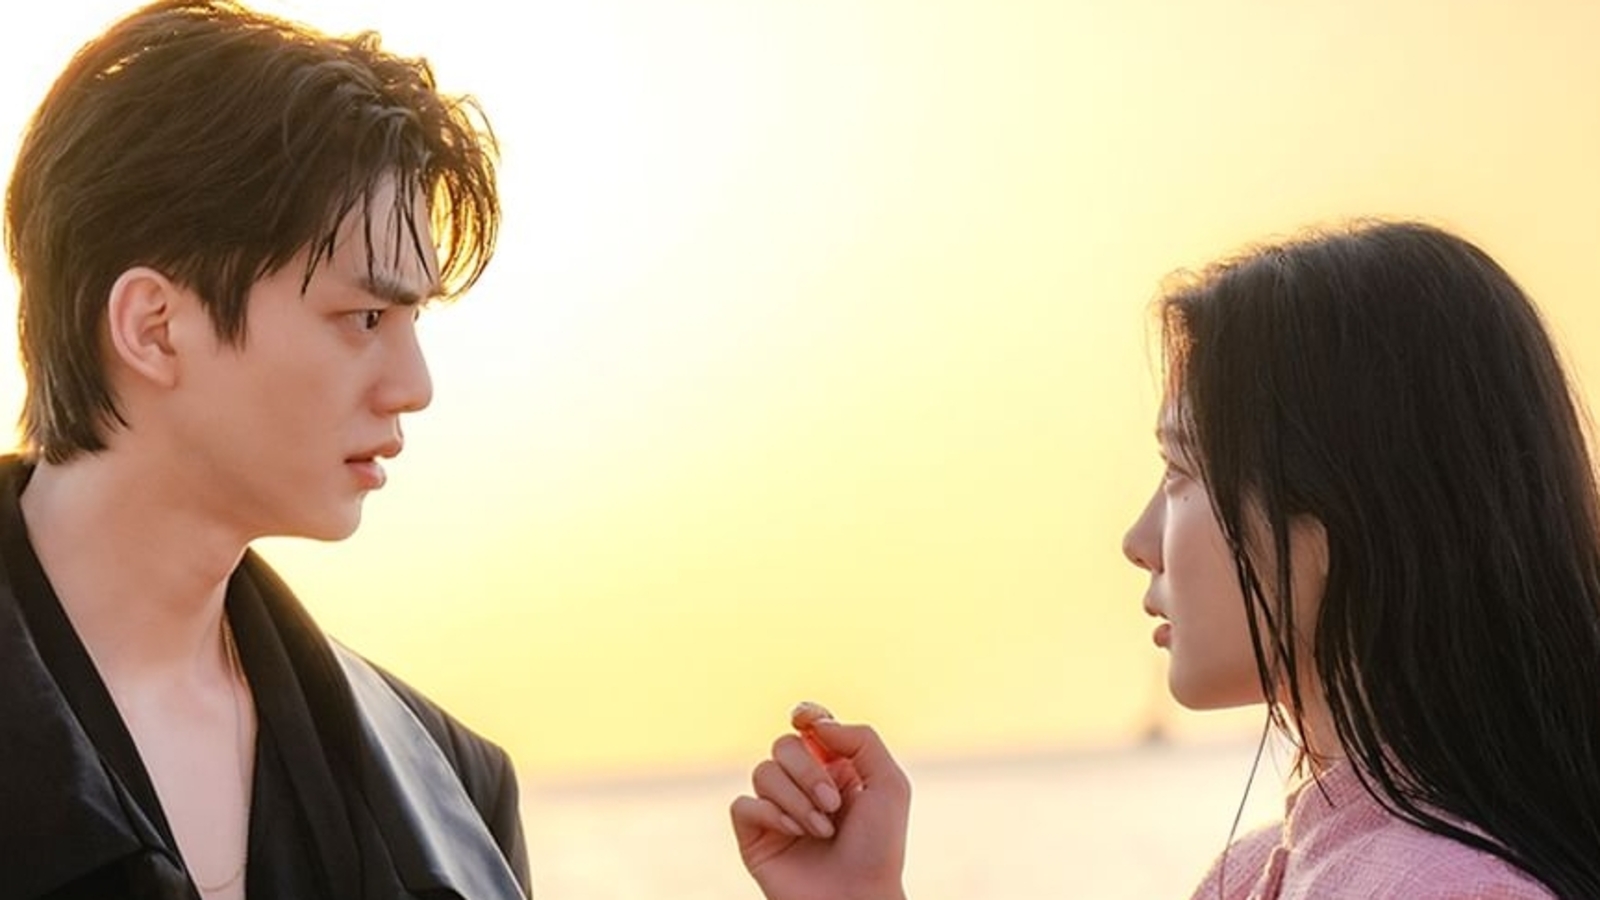 My Demon Episode 1 review: Song Kang exudes devilish charm on first date